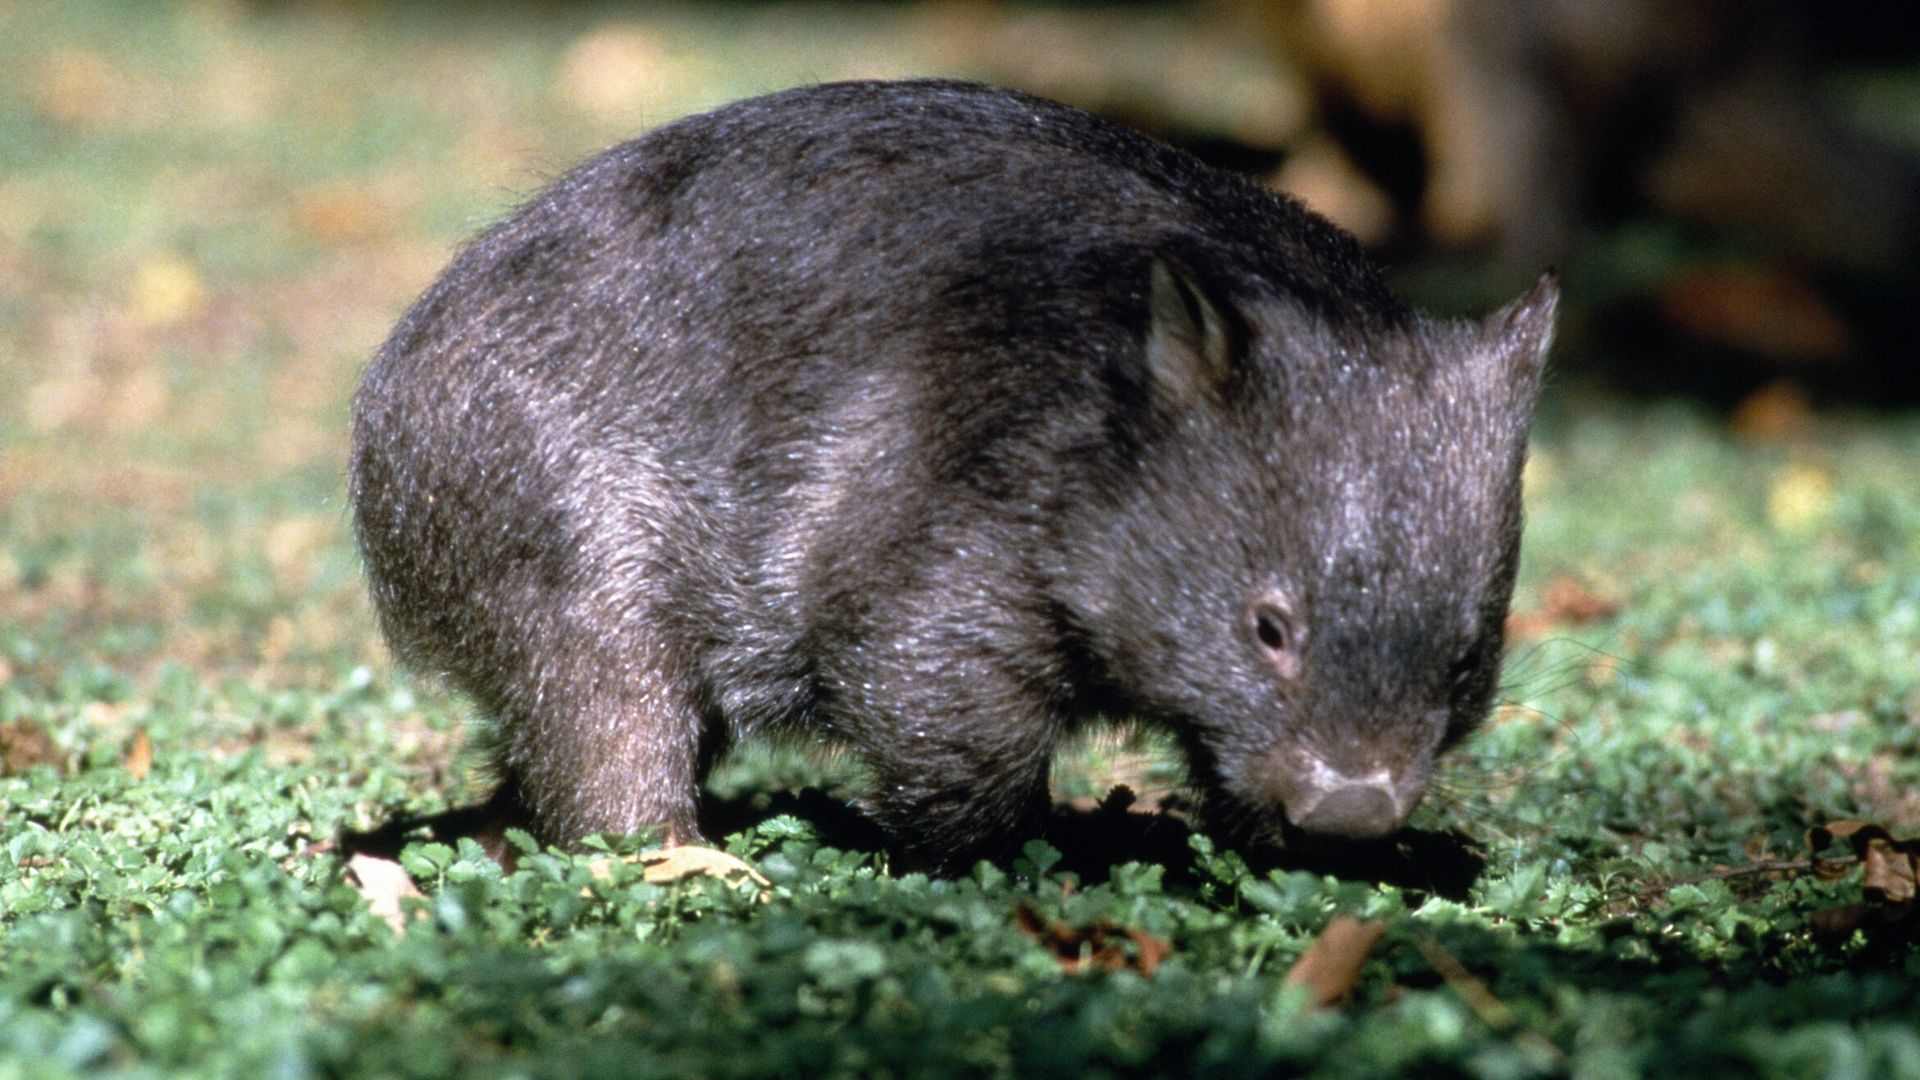 Accidental heroes: How wombats really save other animals during bushfires